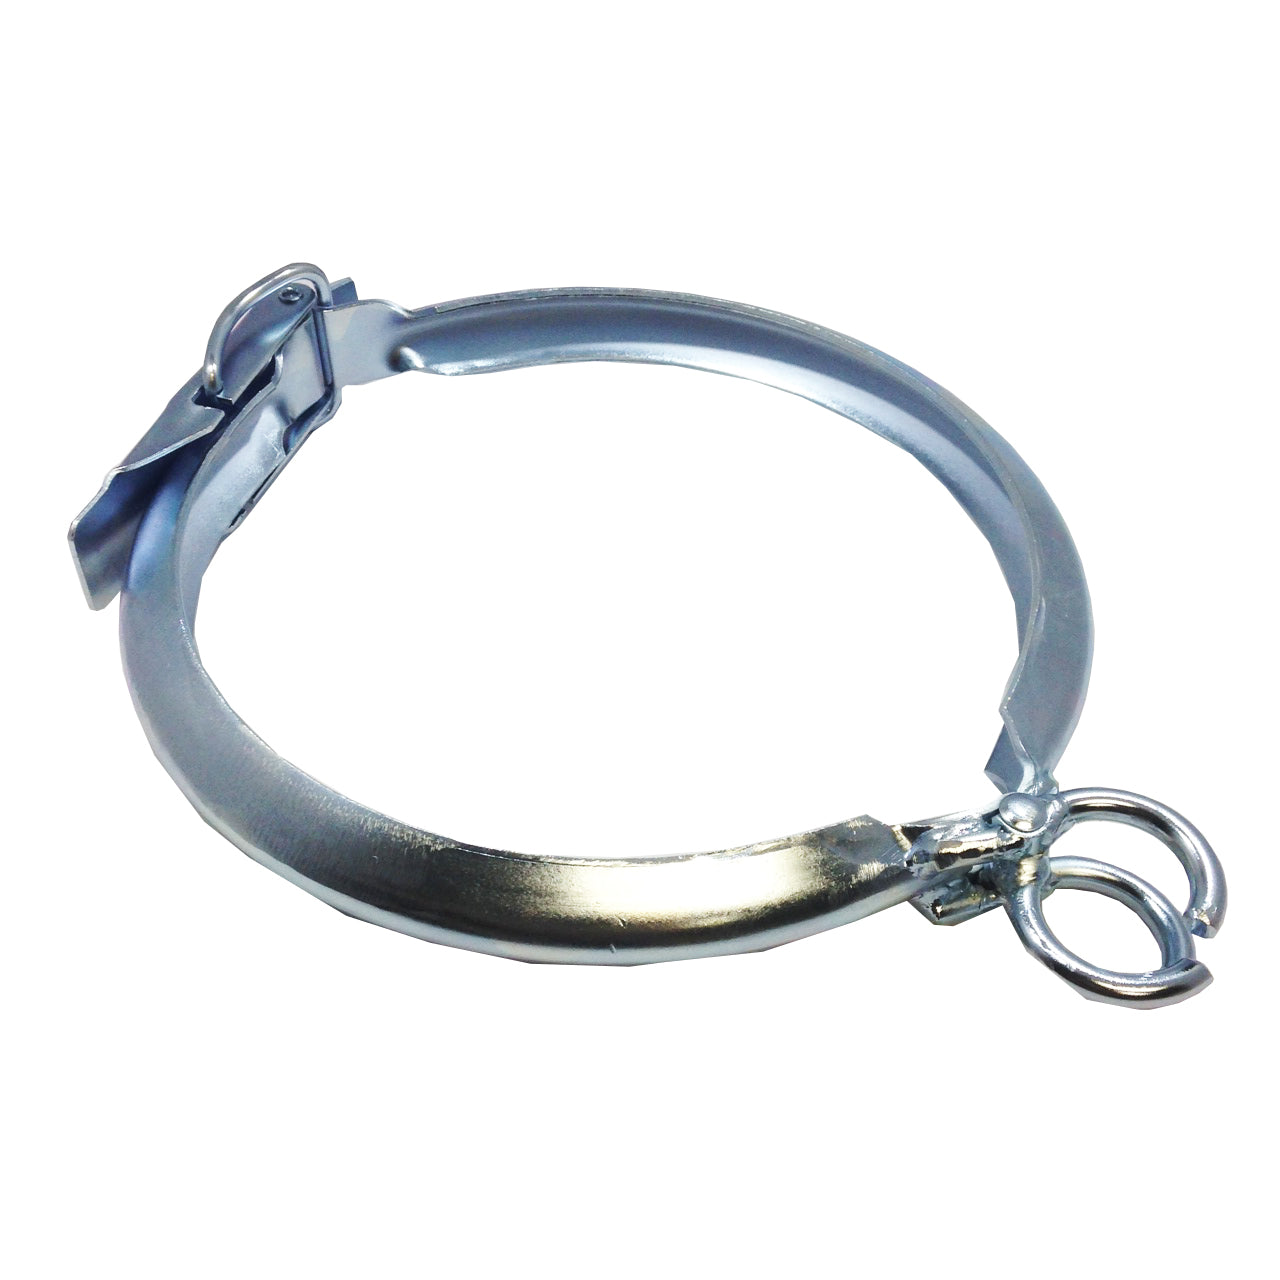 Tube Hose Clamp Sewer Cleaning Equipment